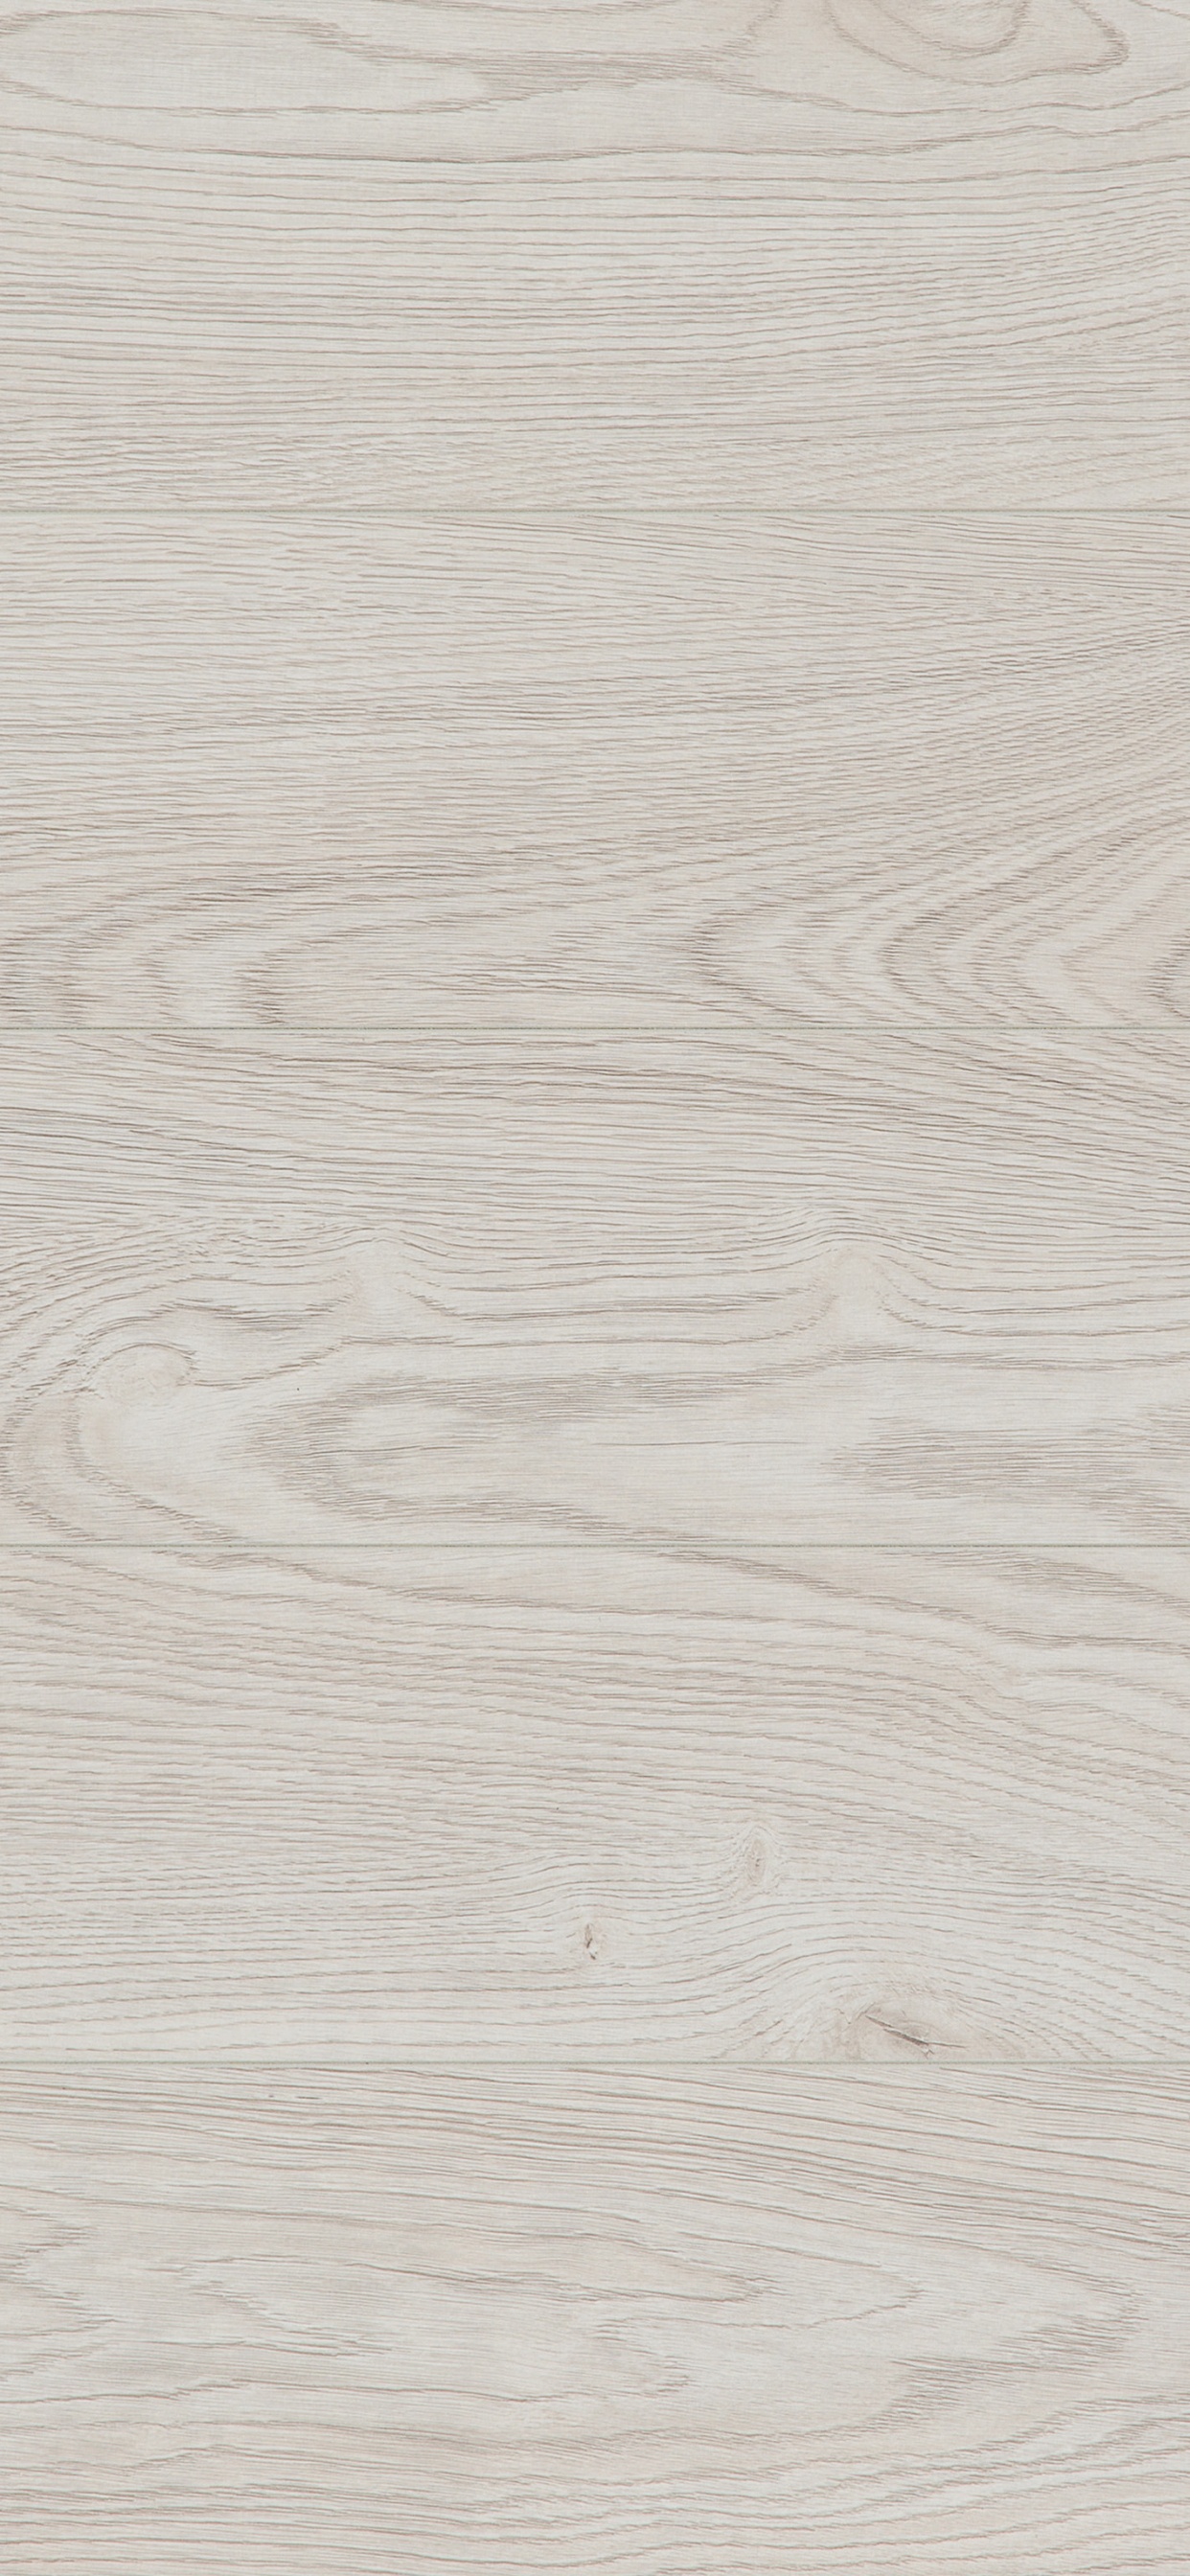 White and Brown Wooden Surface. Wallpaper in 1242x2688 Resolution